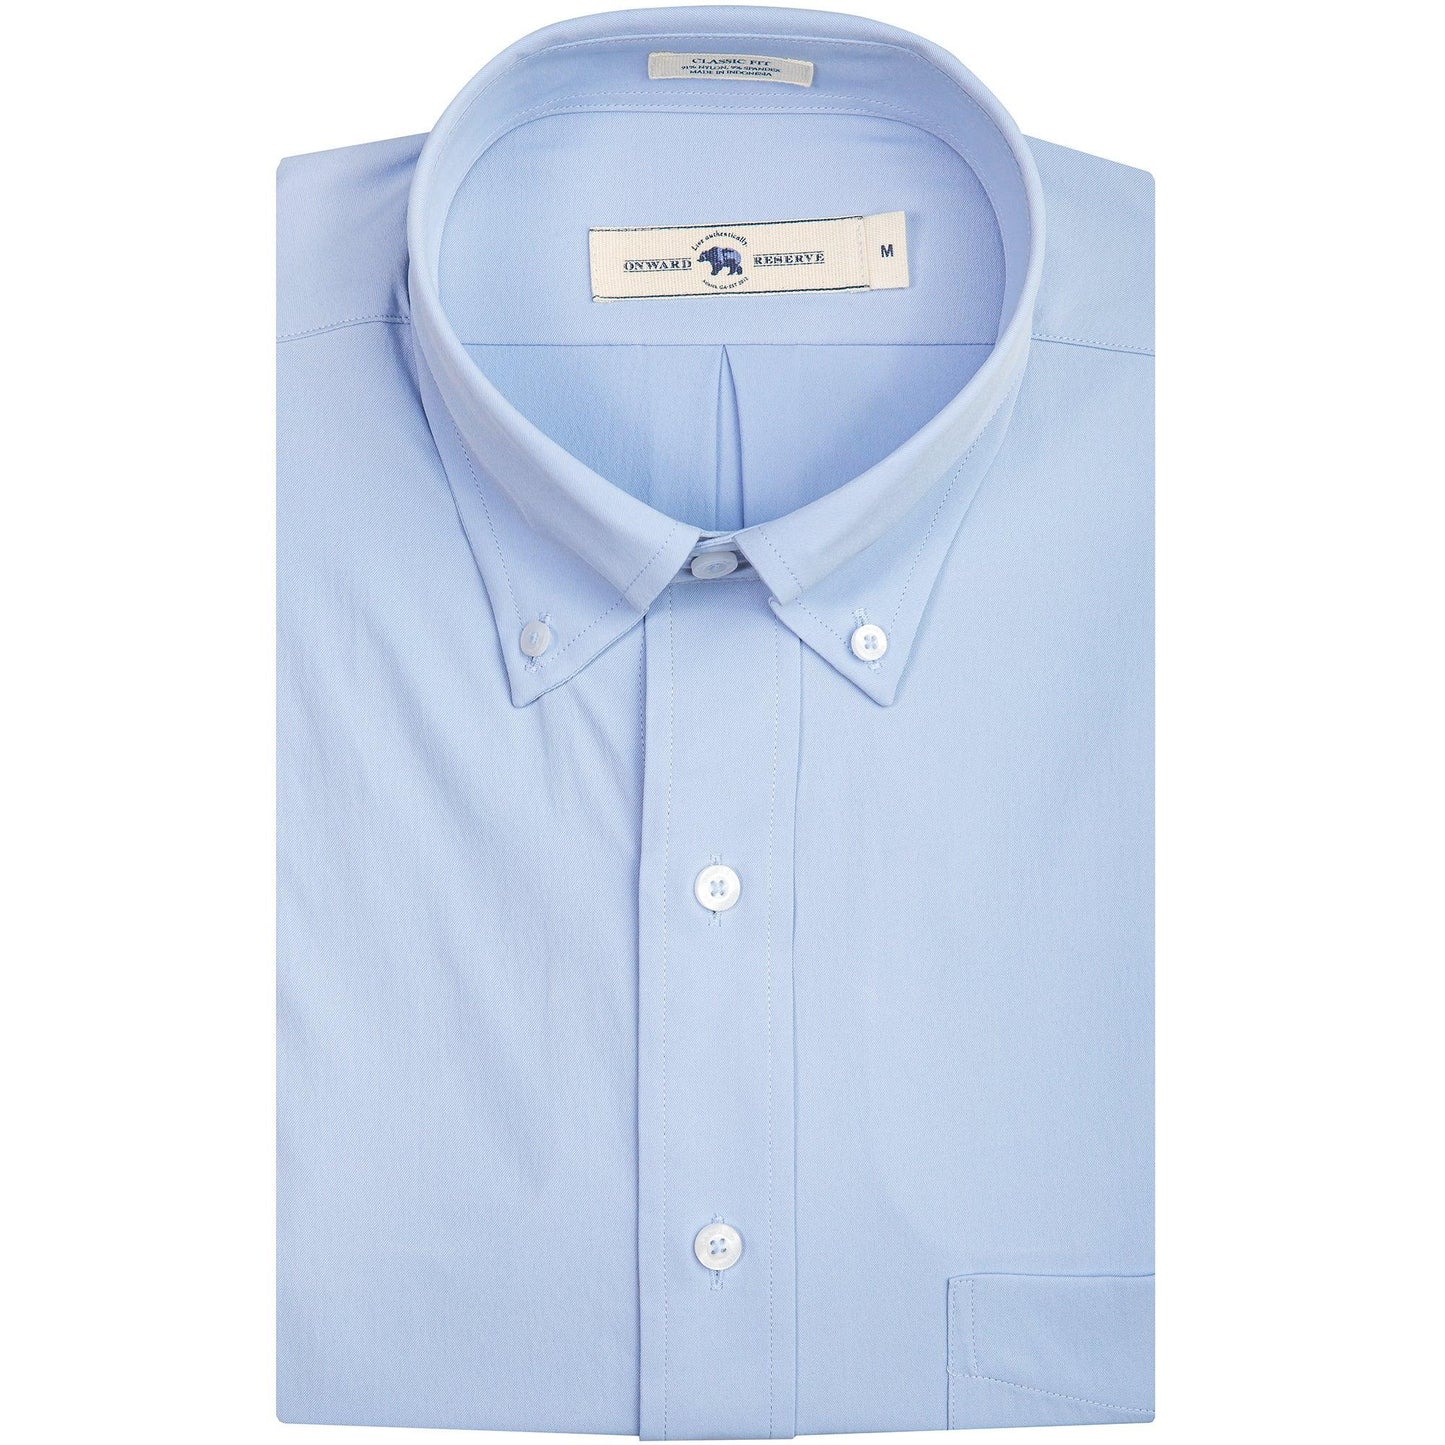 Solid Sky Blue Classic Fit Performance Button Down - Onward Reserve